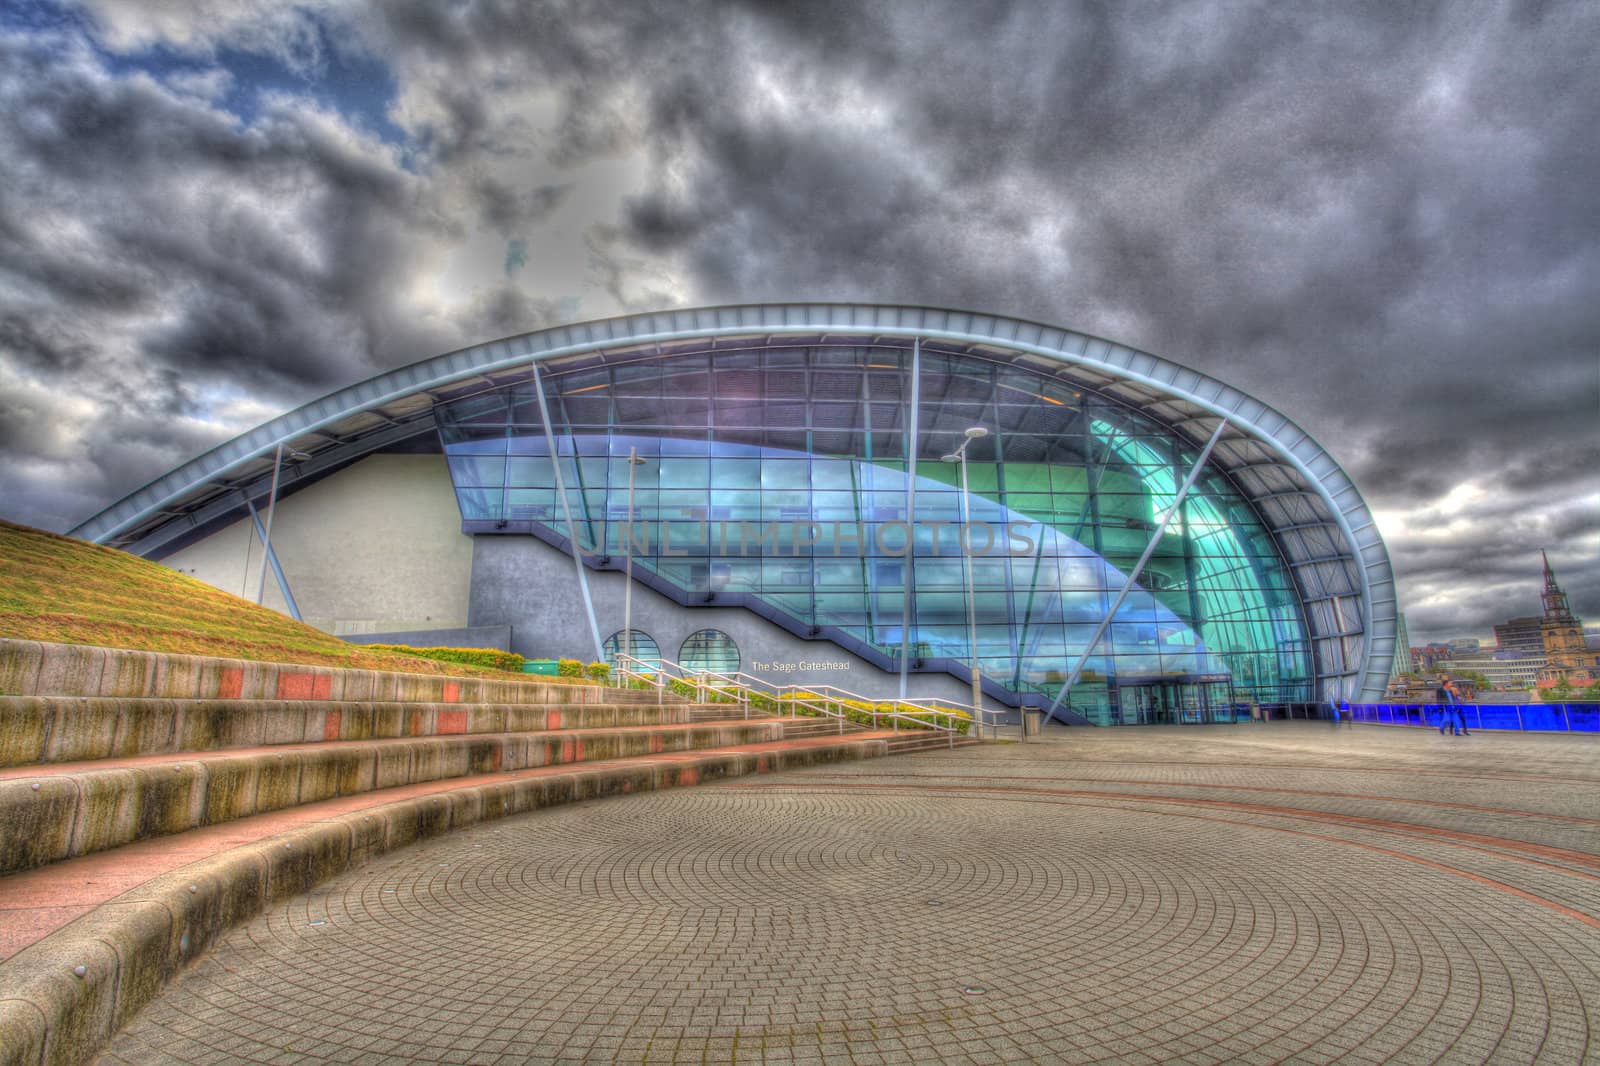 The Sage Building in Newcastle Upon Tyne by olliemt